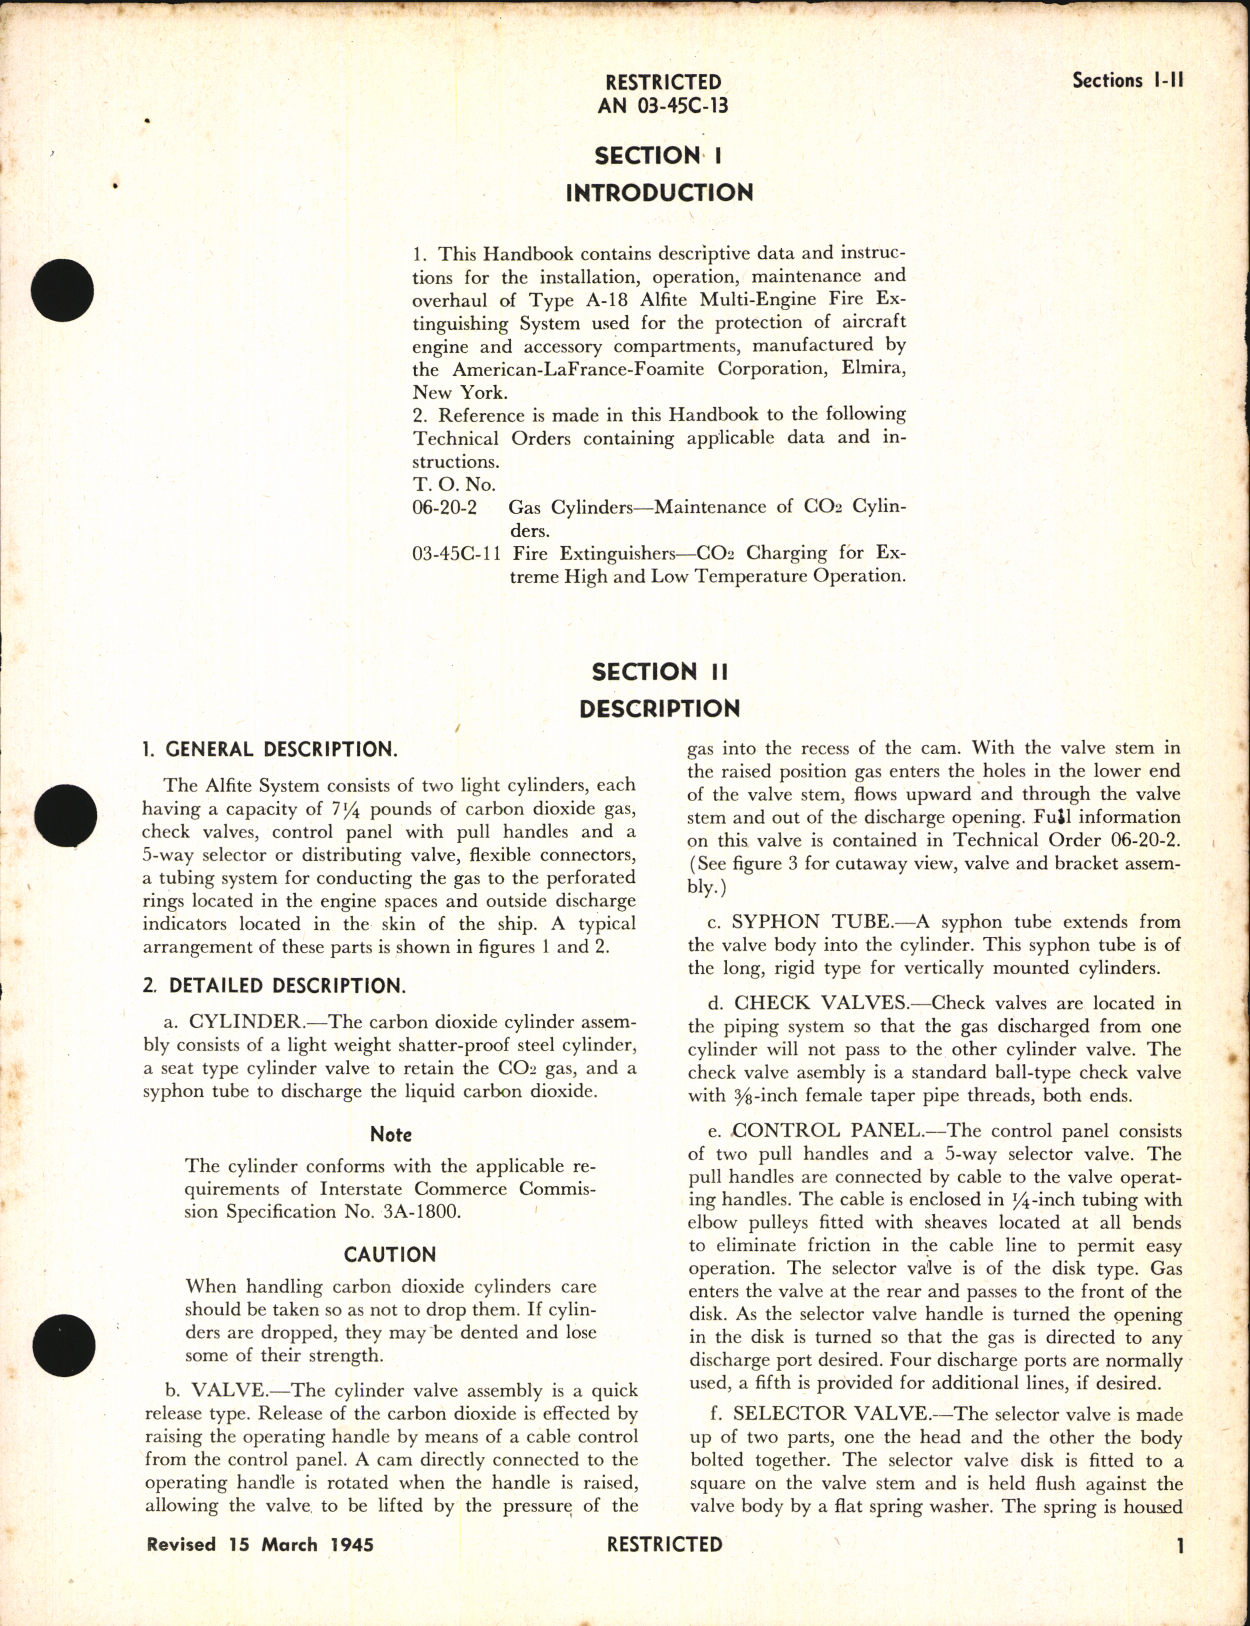 Sample page 5 from AirCorps Library document: Handbook of Instructions with Parts Catalog for A-18 Multi-Engine Fire Extinguishing System